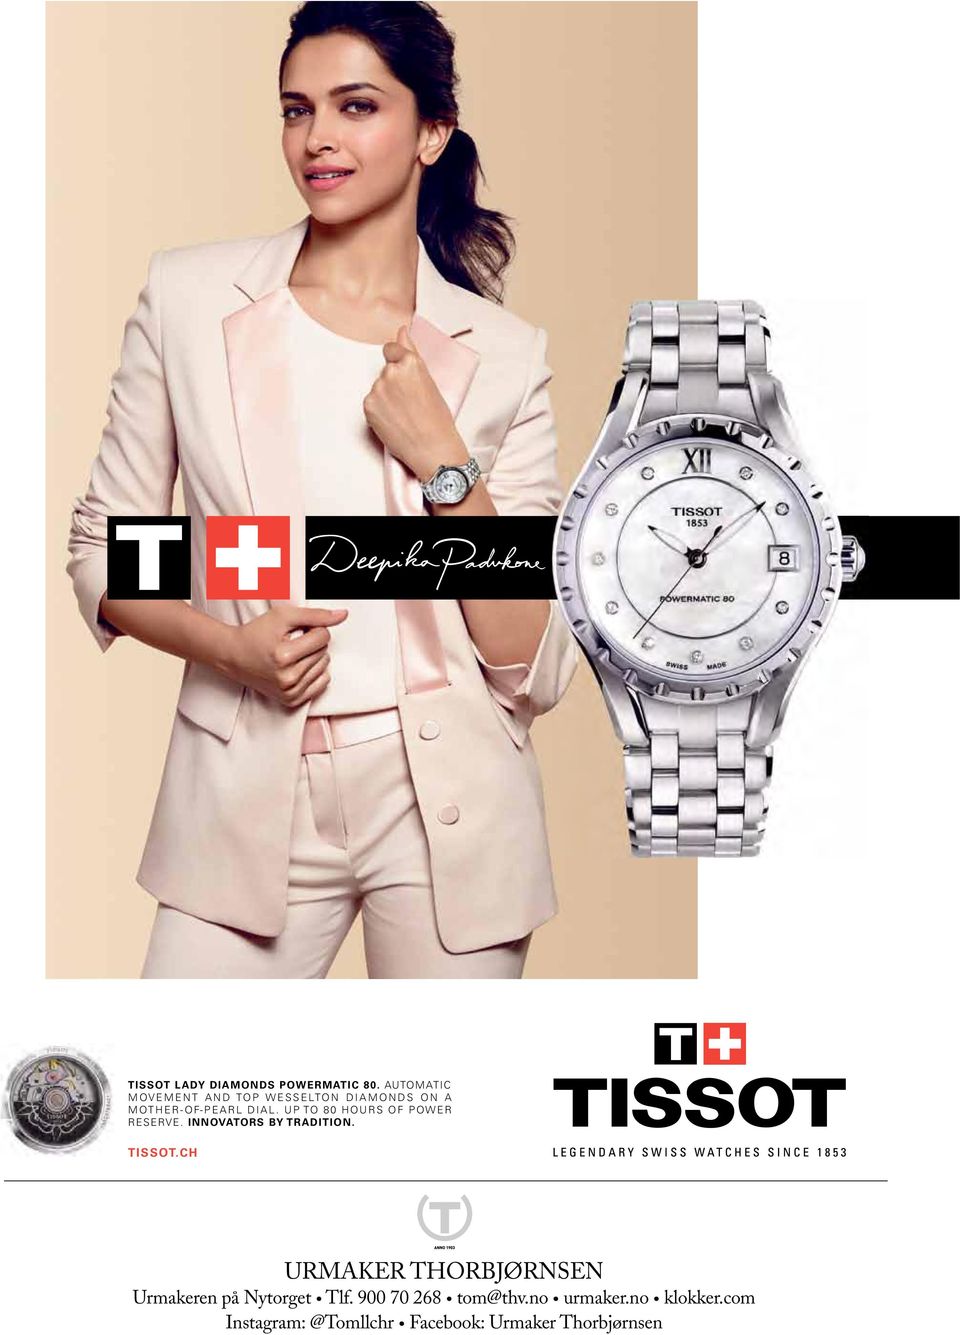 UP TO 80 HOURS OF POWER RESERVE. INNOVATORS BY TRADITION. TISSOT.